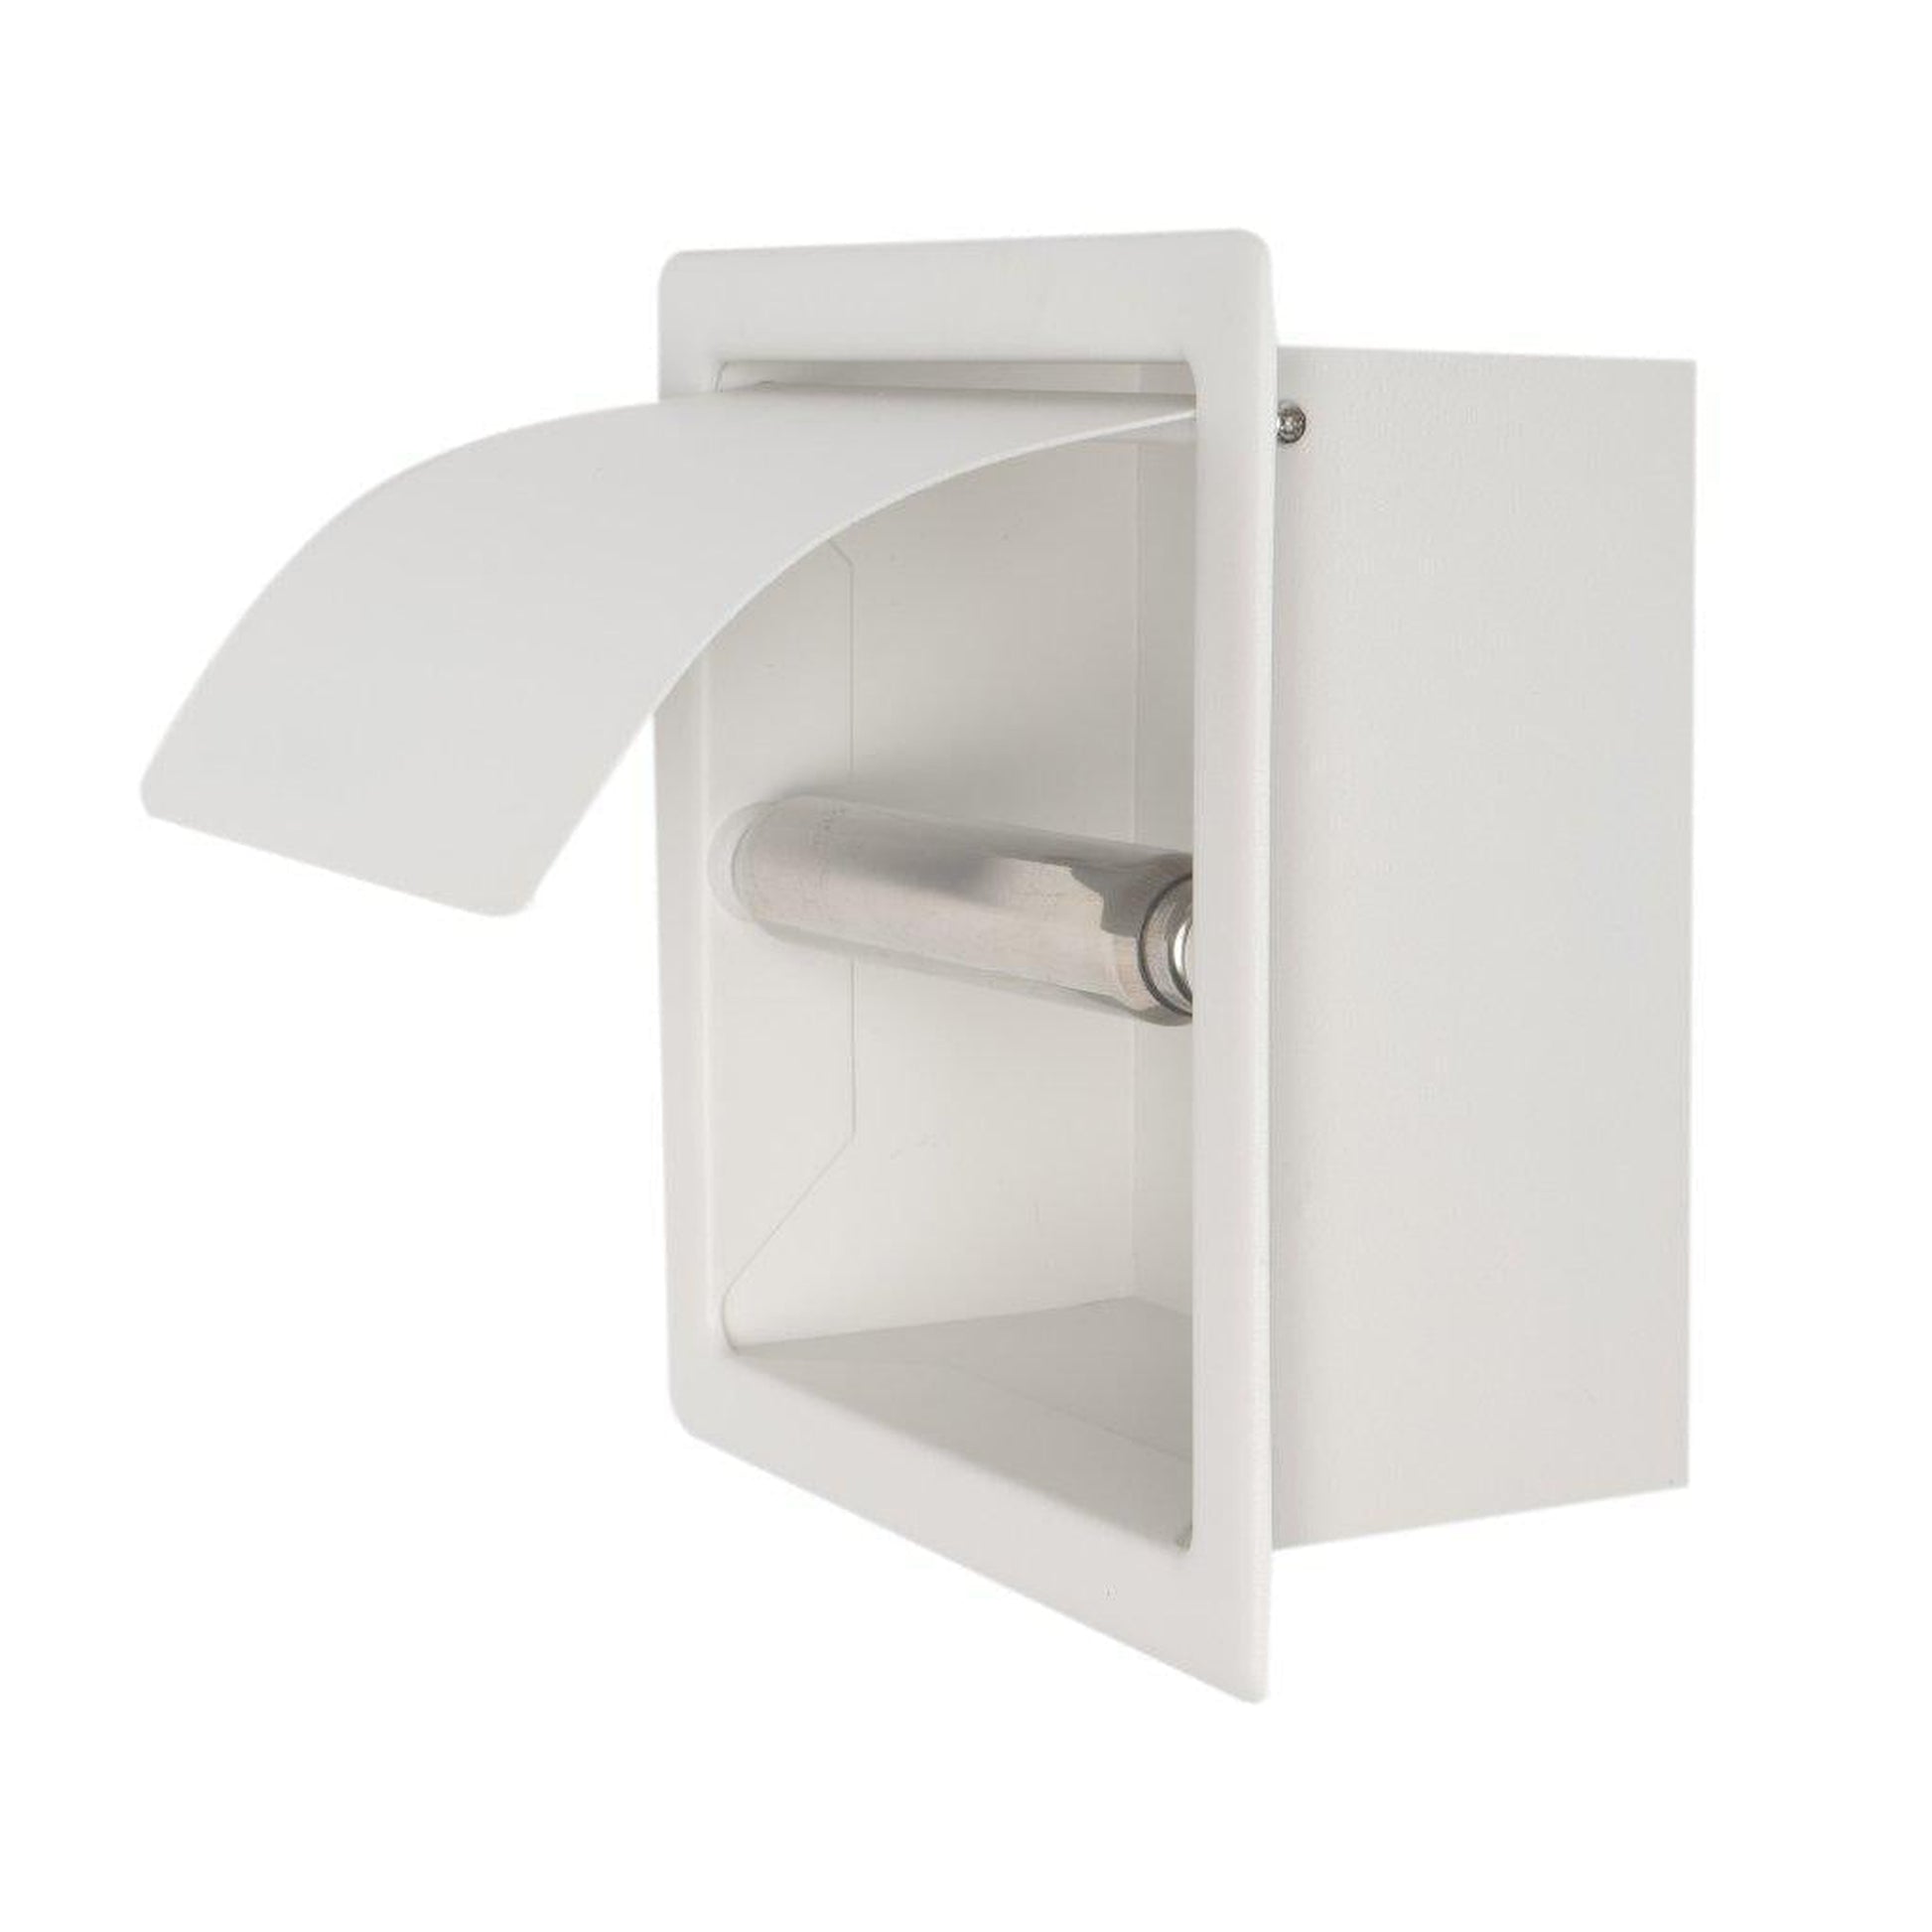 ALFI Brand ABTPC77-W White Matte Stainless Steel Recessed Toilet Paper Holder With Cover